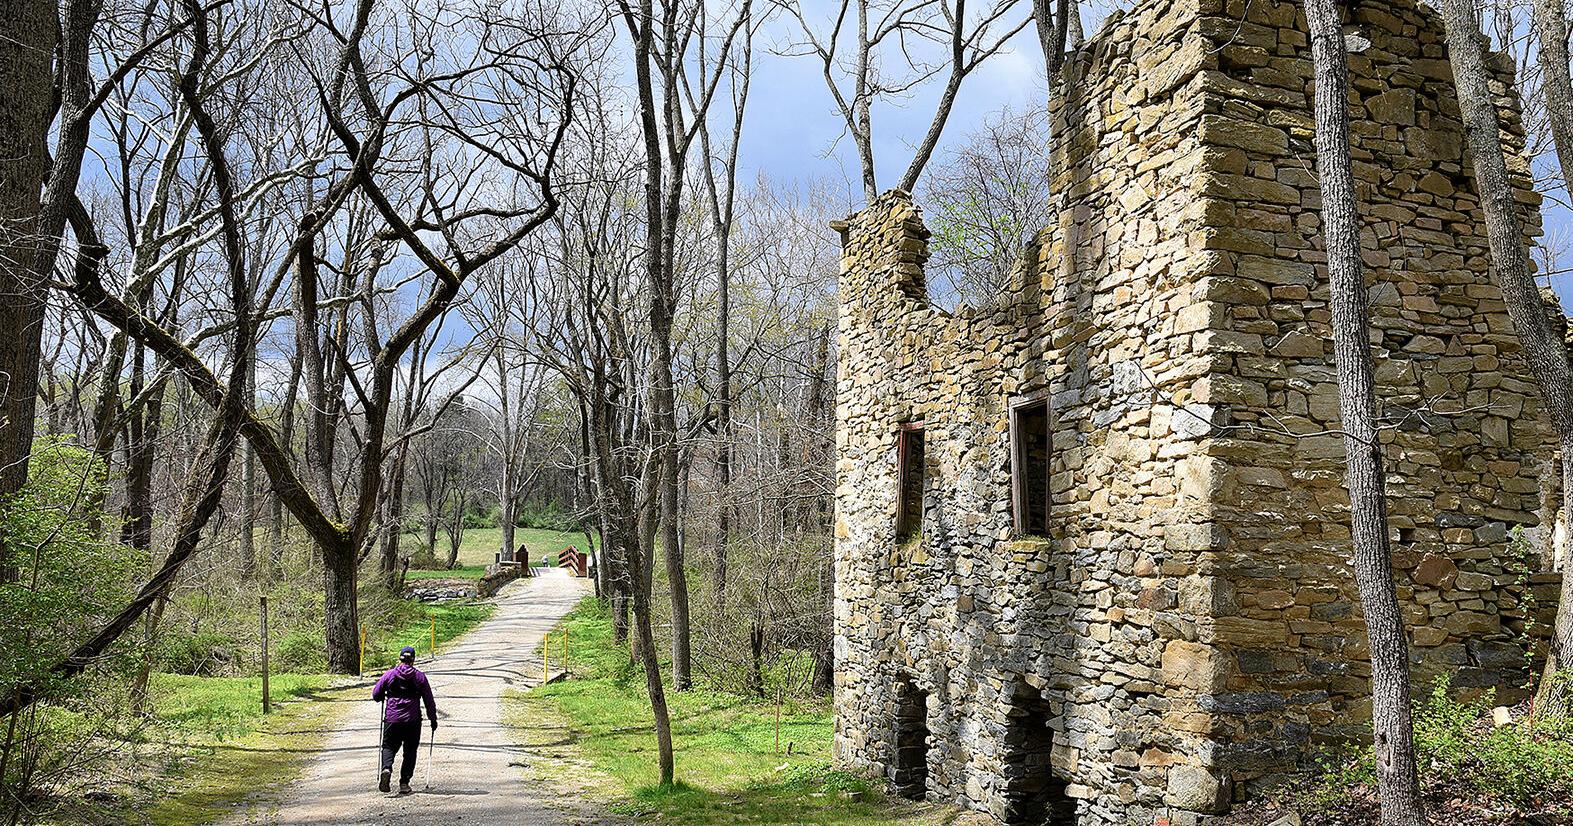 Indulge in a varied landscape at Maryland's Fair Hill natural area